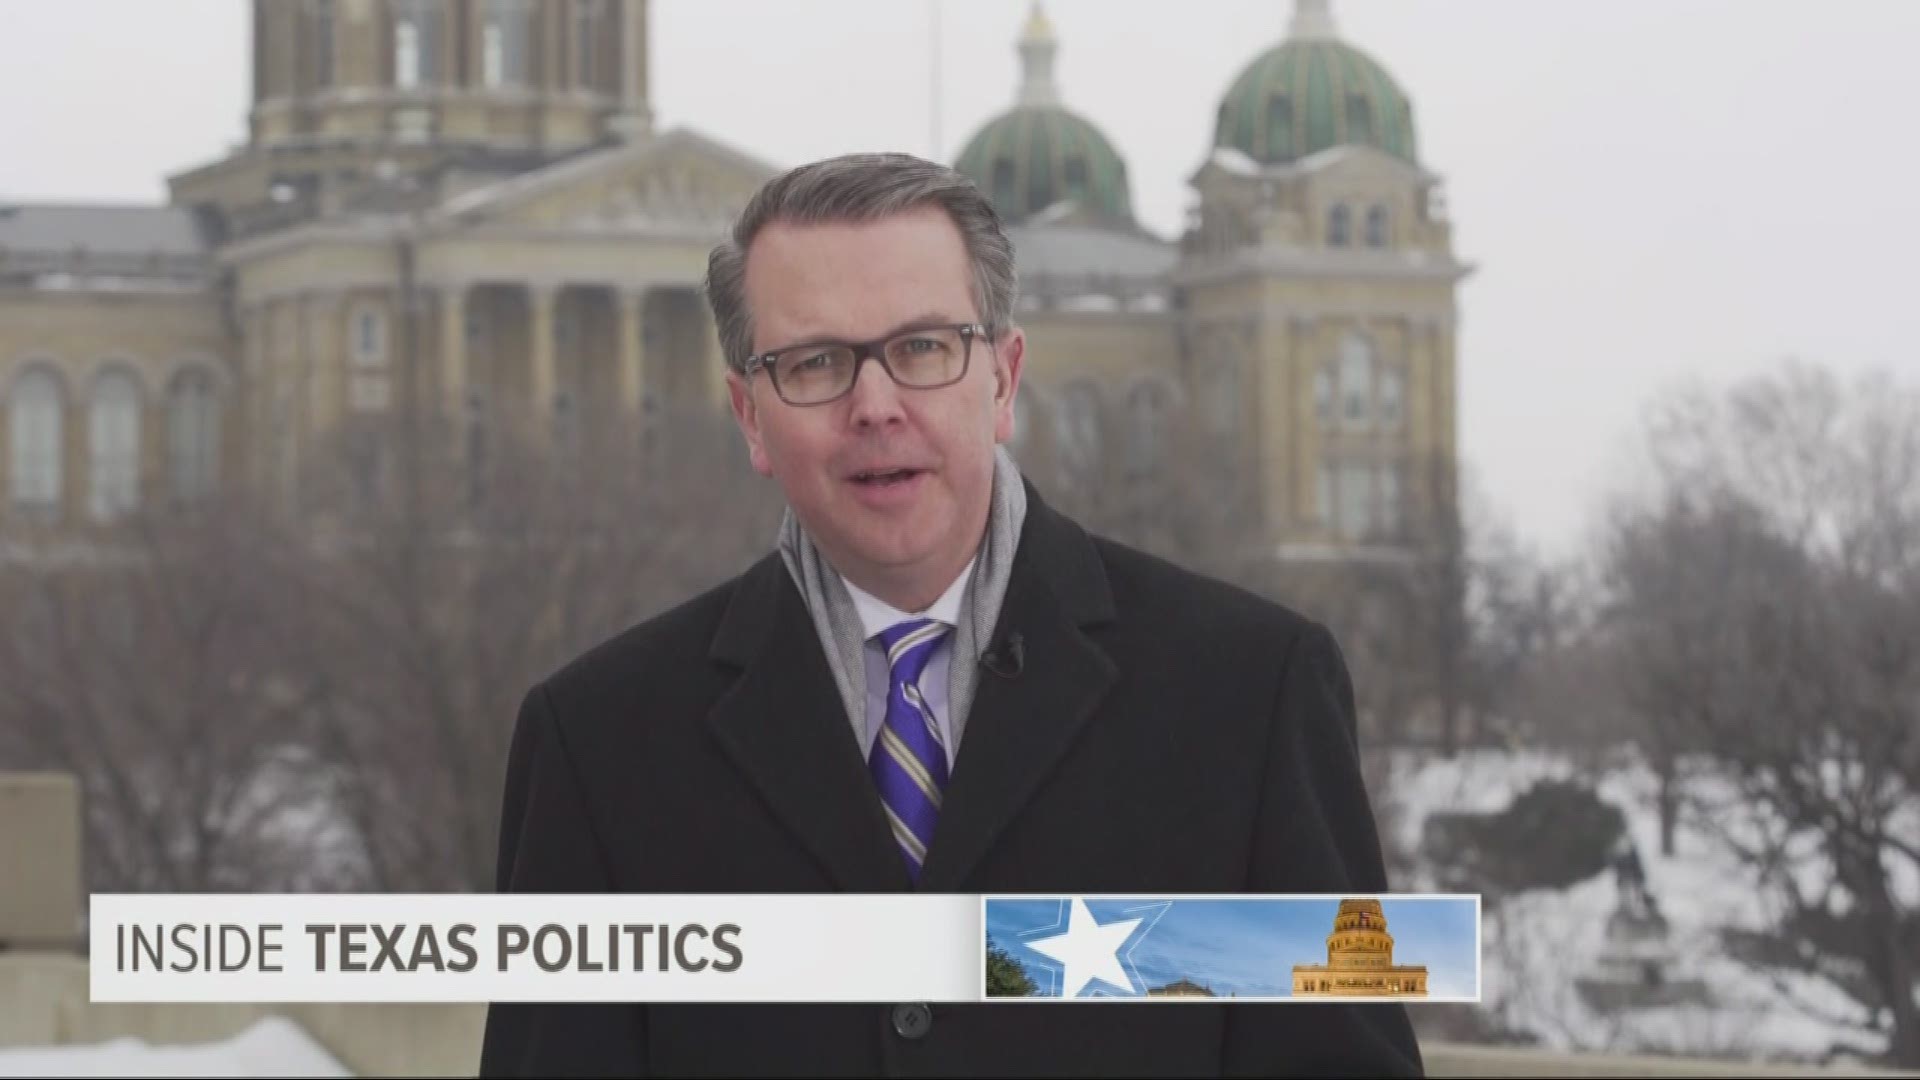 Live from Iowa, "Inside Texas Politics" takes a look at the big news for the elections in 2020.